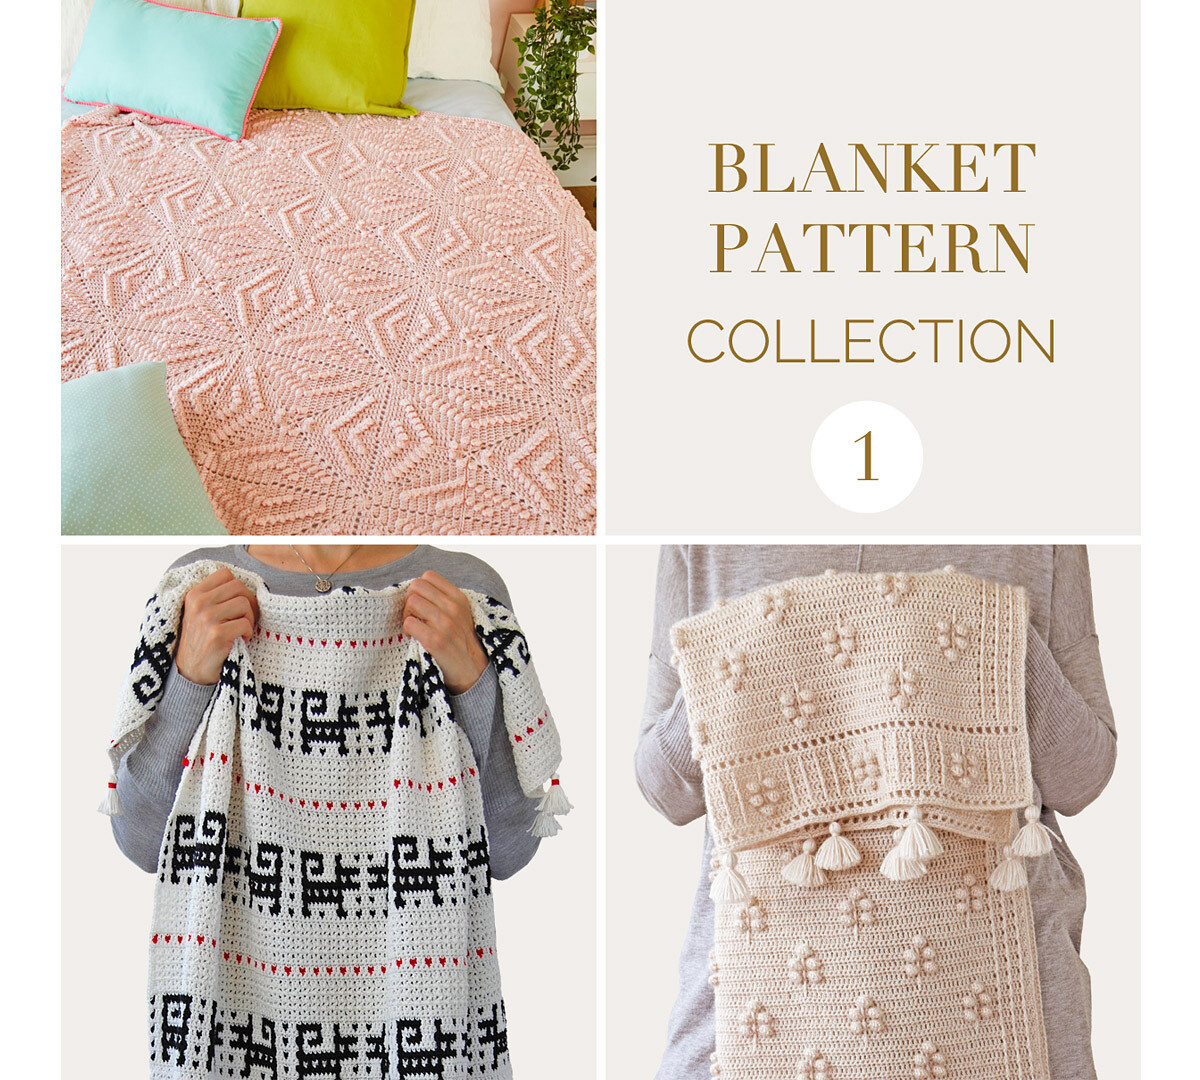 CROCHET BLANKET PATTERN COLLECTION 1